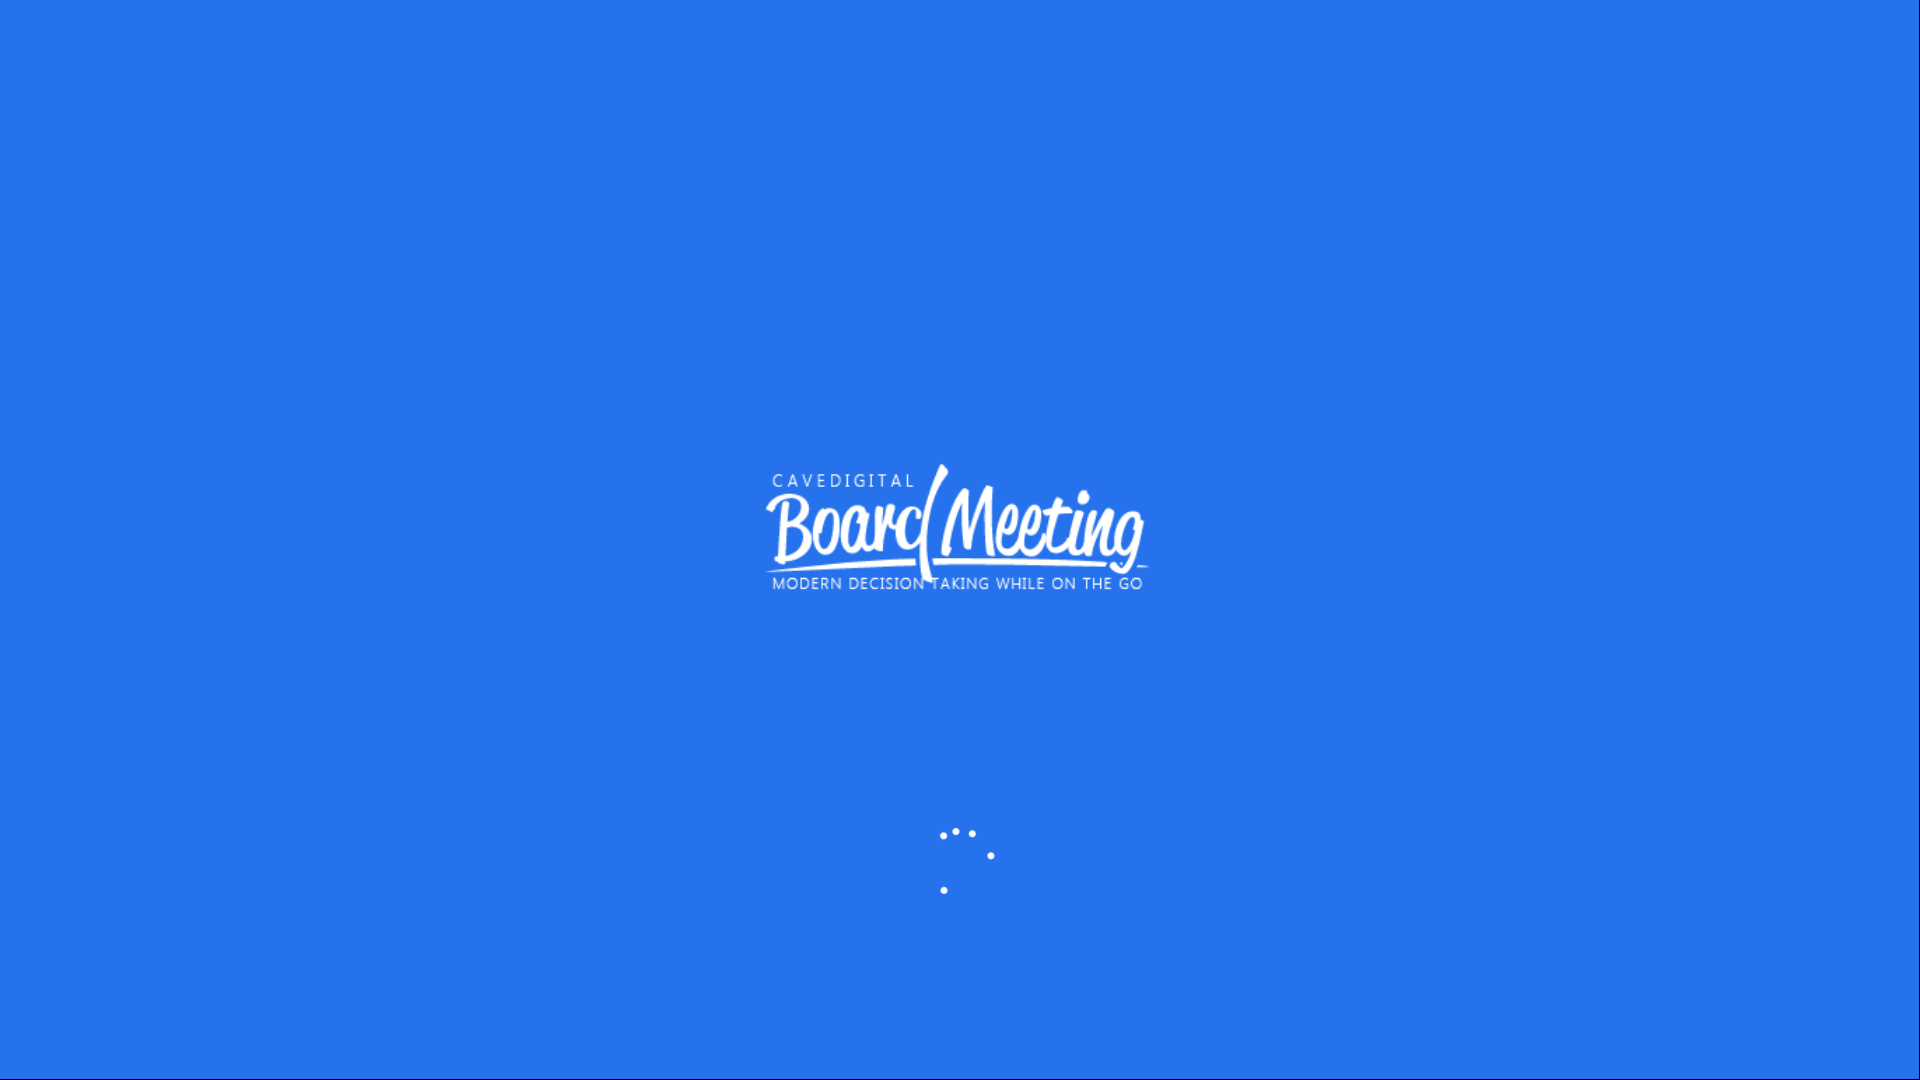 Board Meeting app for Windows 8 provides a clean natural touch interface for your board meetings and proposals allowing for an agile and mobile Board Member experience.